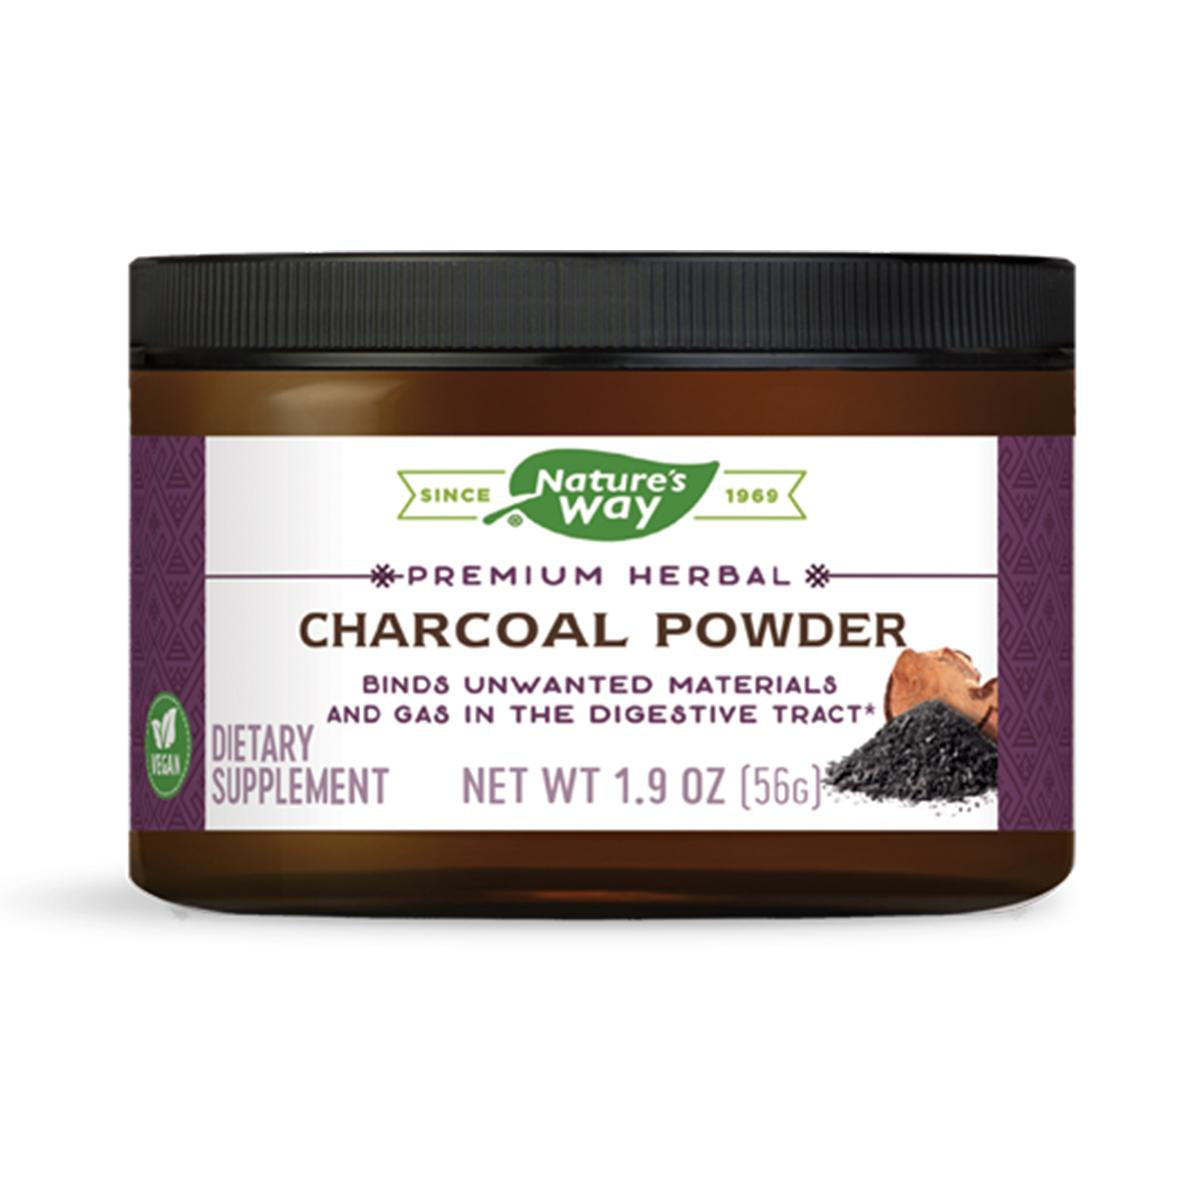 Primary image of Charcoal Powder